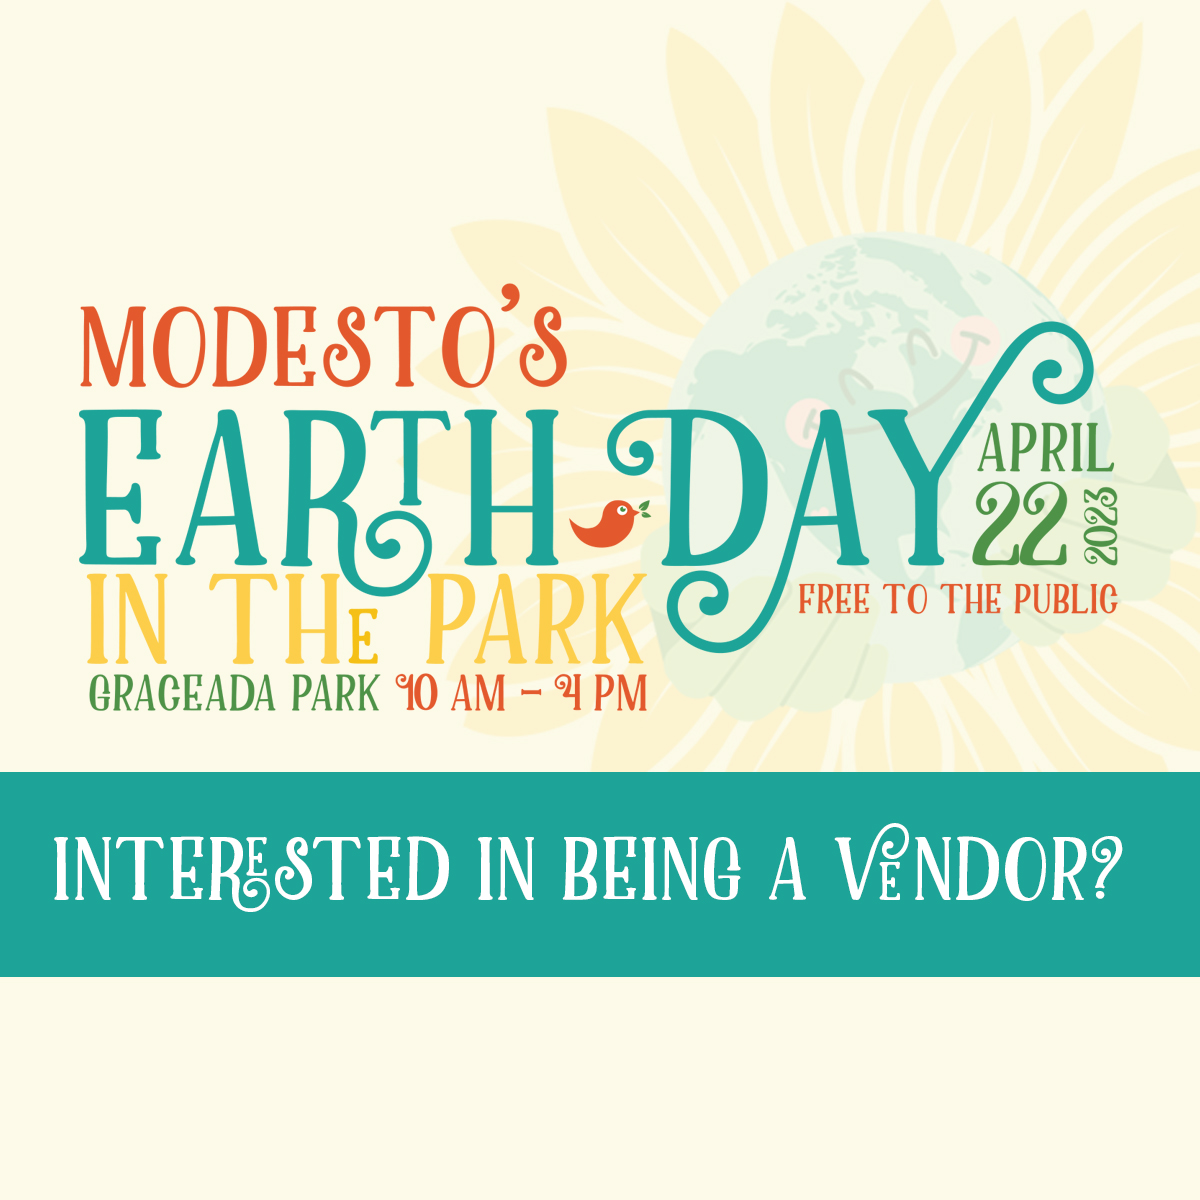 Modesto's Earth Day in the Park